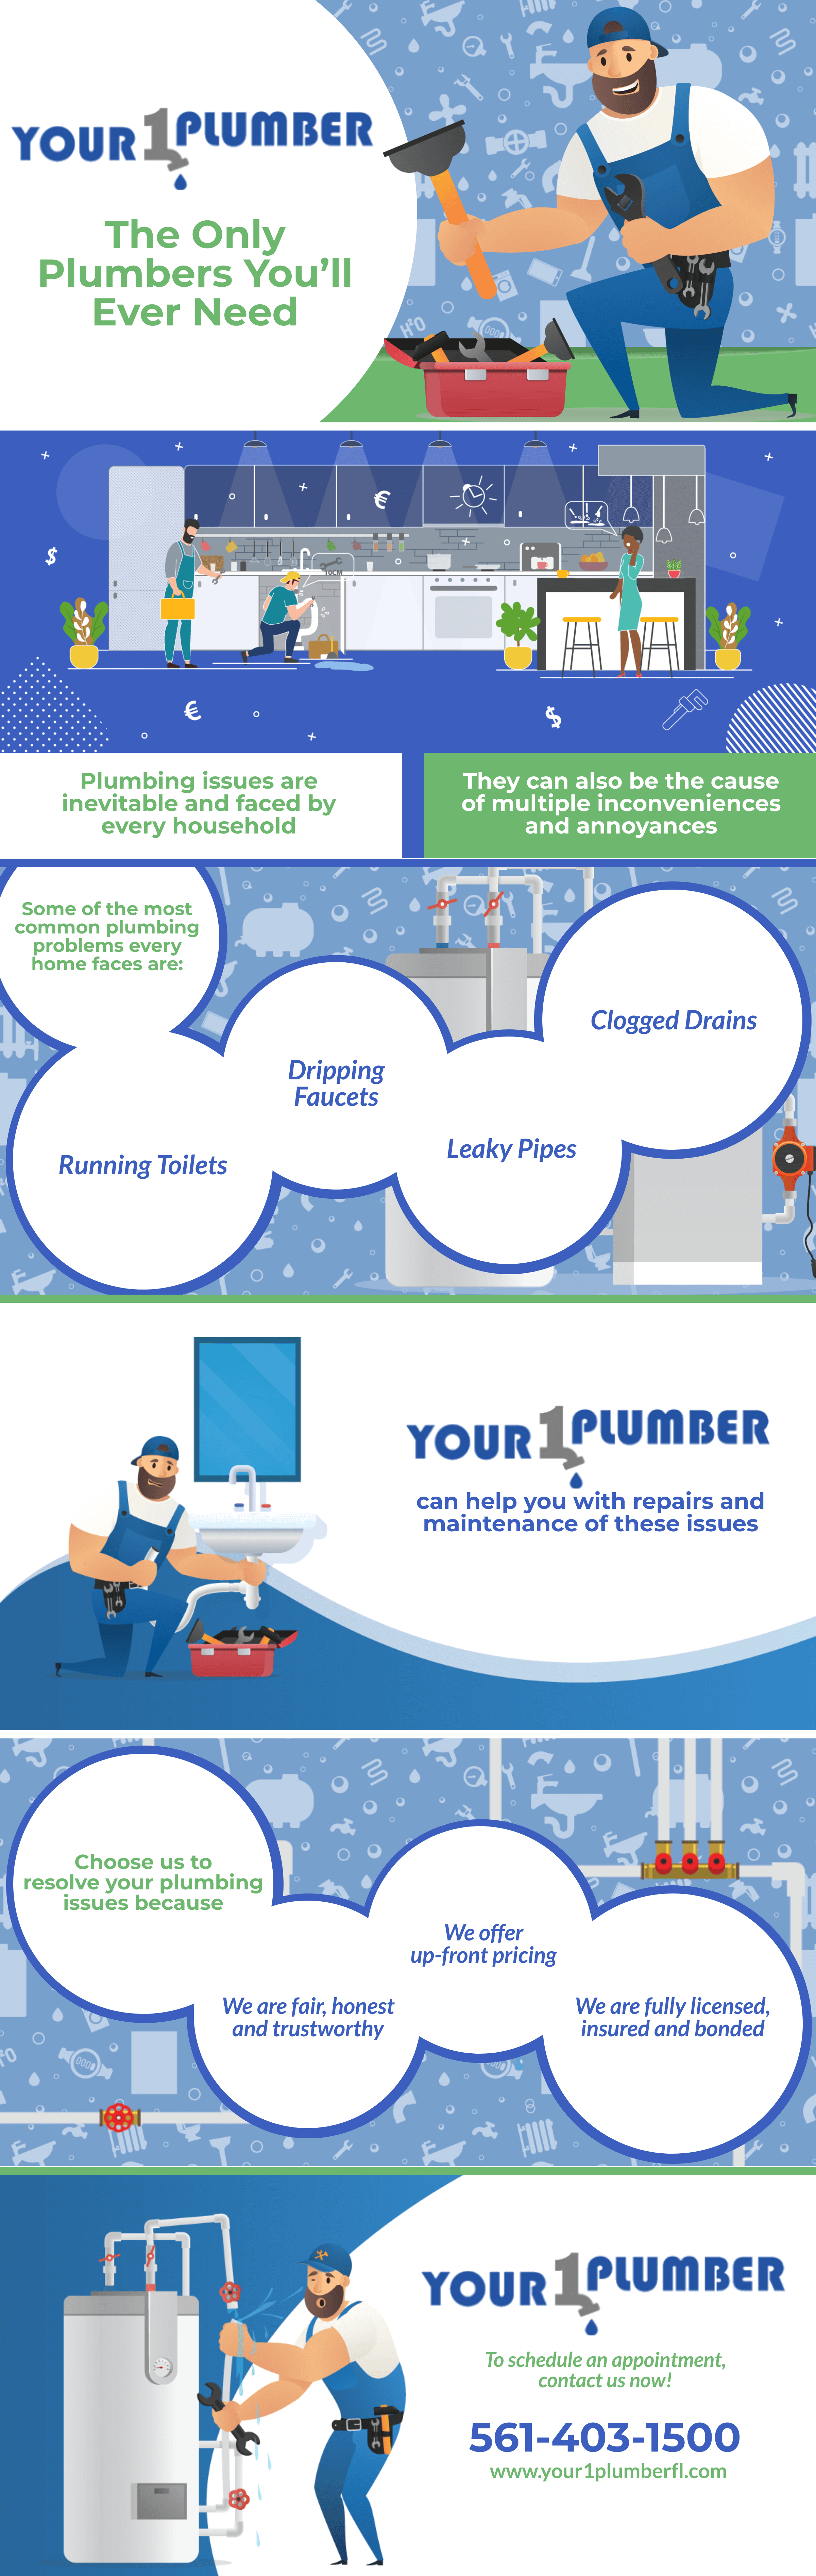 your-1-plumber-the-only-plumbers-youll-ever-need